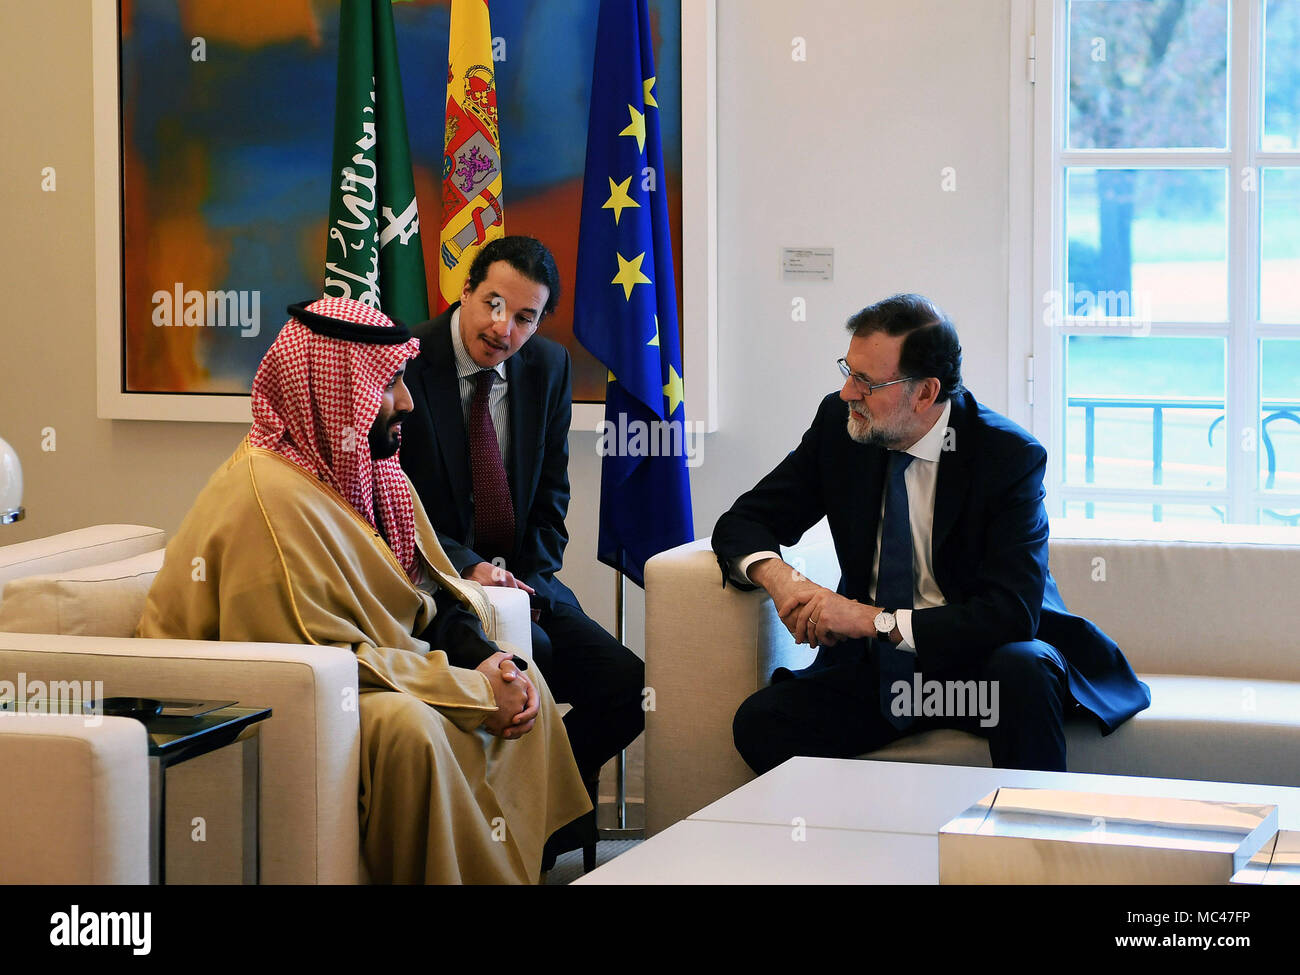 Madrid. 12th Apr, 2018. Spanish Prime Minister Mariano Rajoy Brey (R) meets with visiting Saudi Crown Prince Mohammed bin Salman in Madrid April 12, 2018. Credit: Guo Qiuda/Xinhua/Alamy Live News Stock Photo